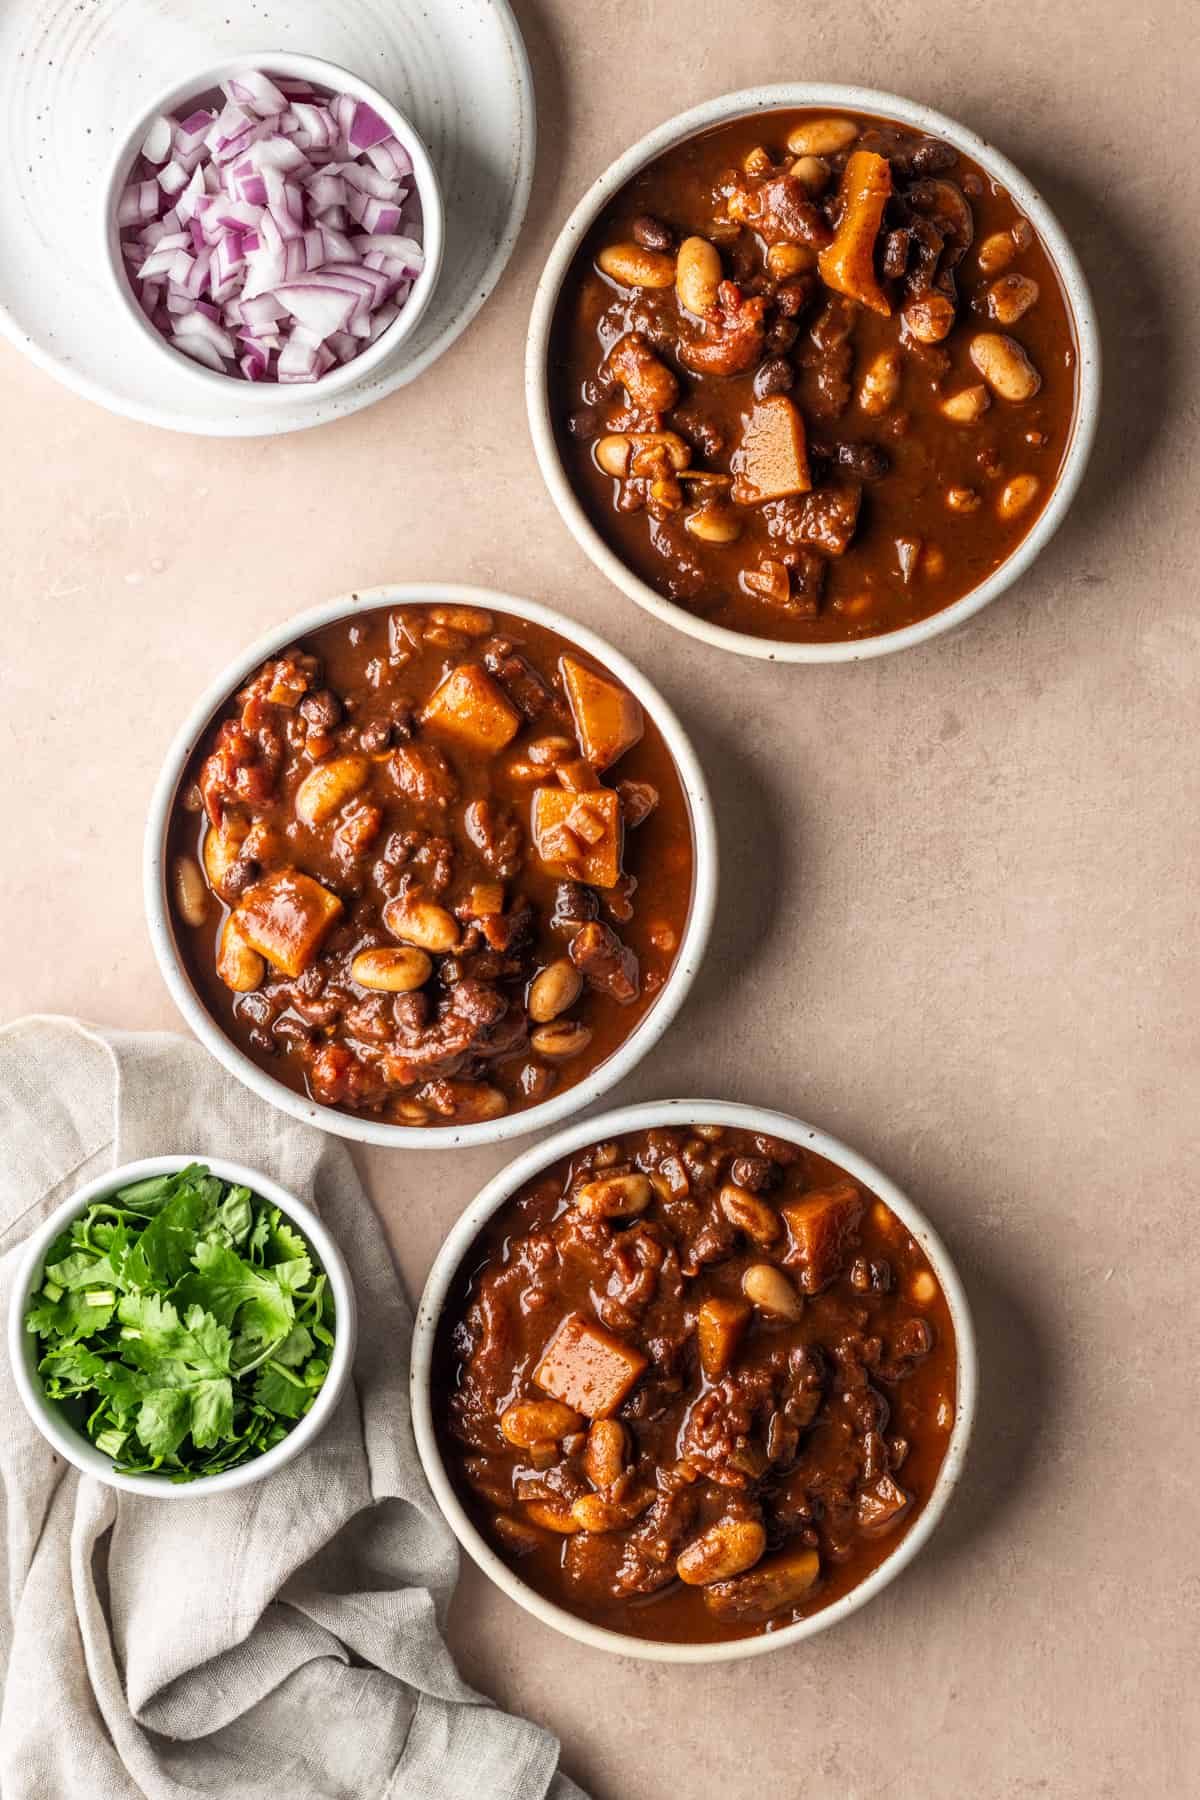 3 Bowls of vegetarian beer chili with pinch bowls of cilantro and red onions.